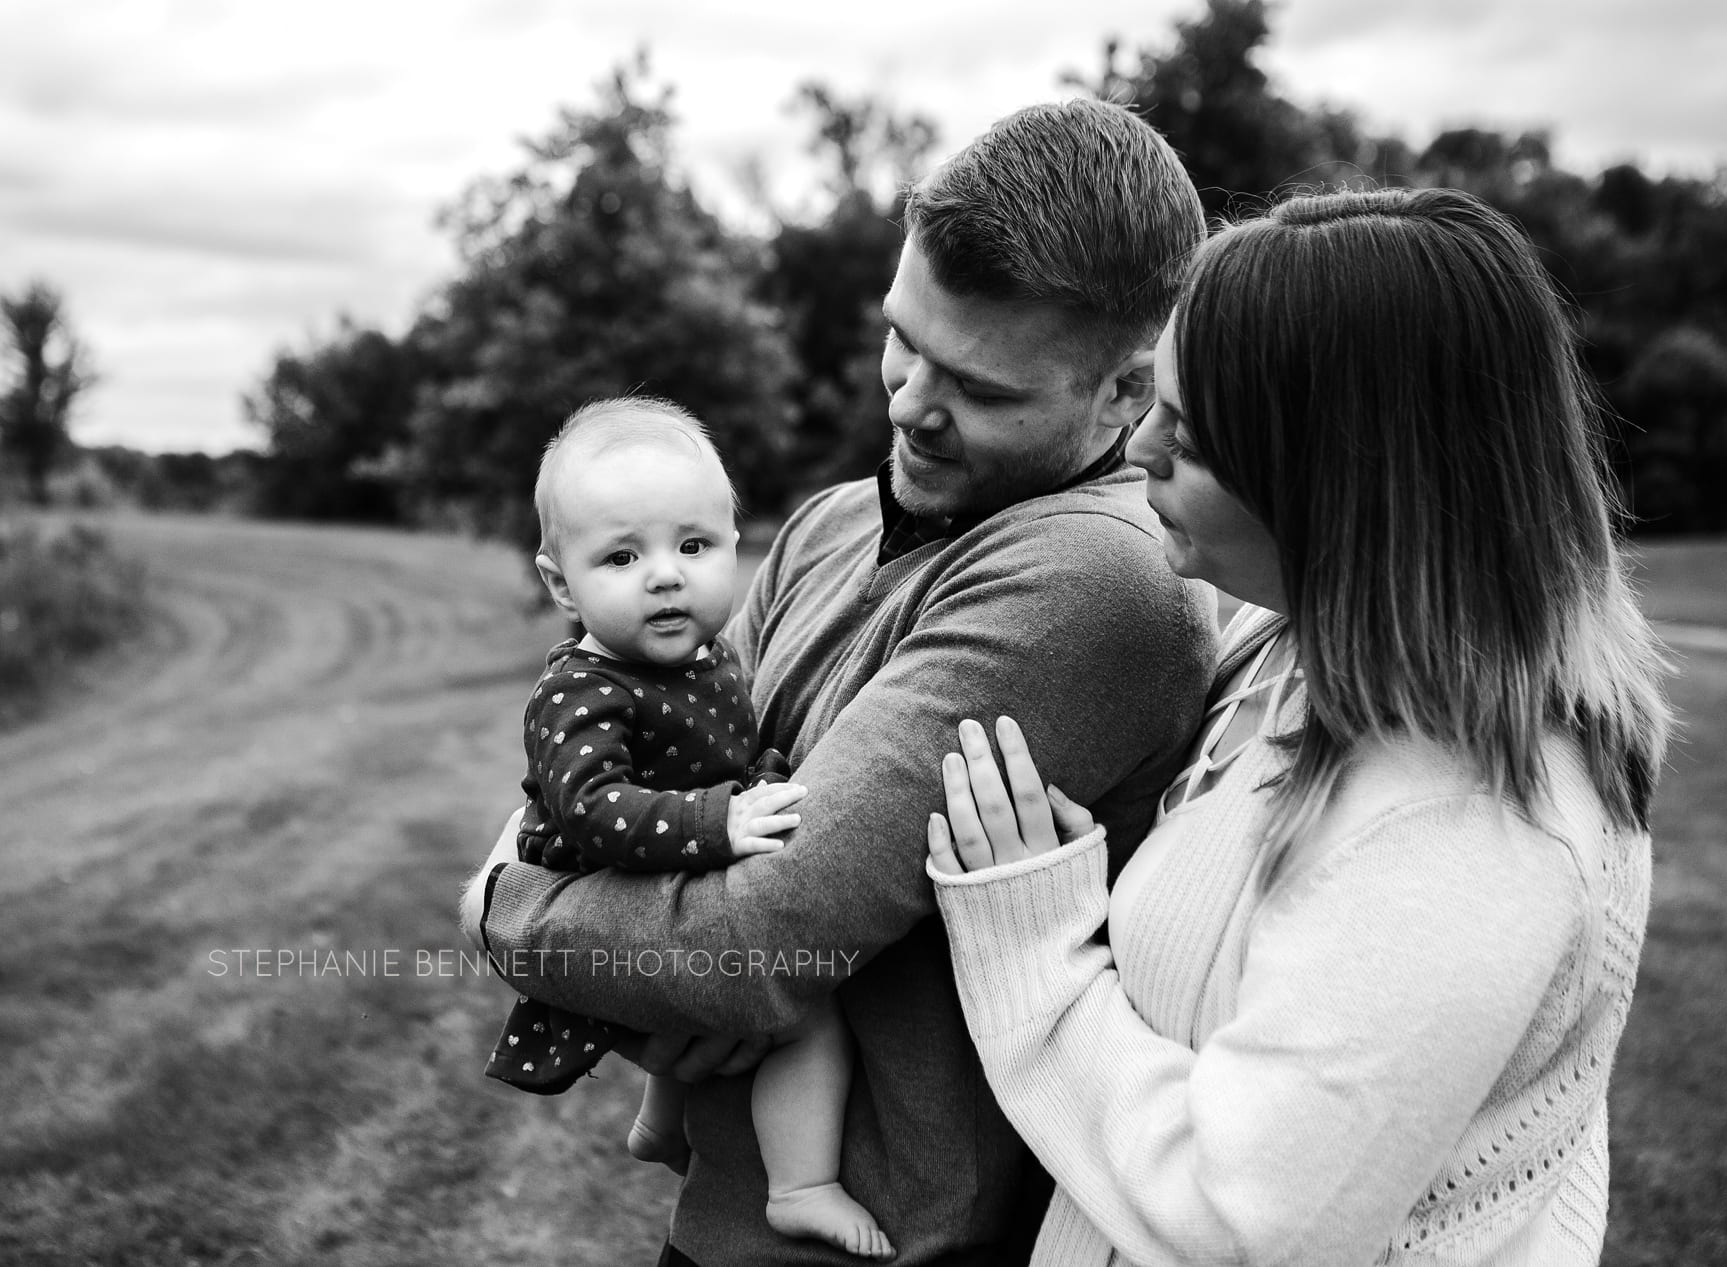 Northfield MN Photographer for family and children.  Fall mini session 